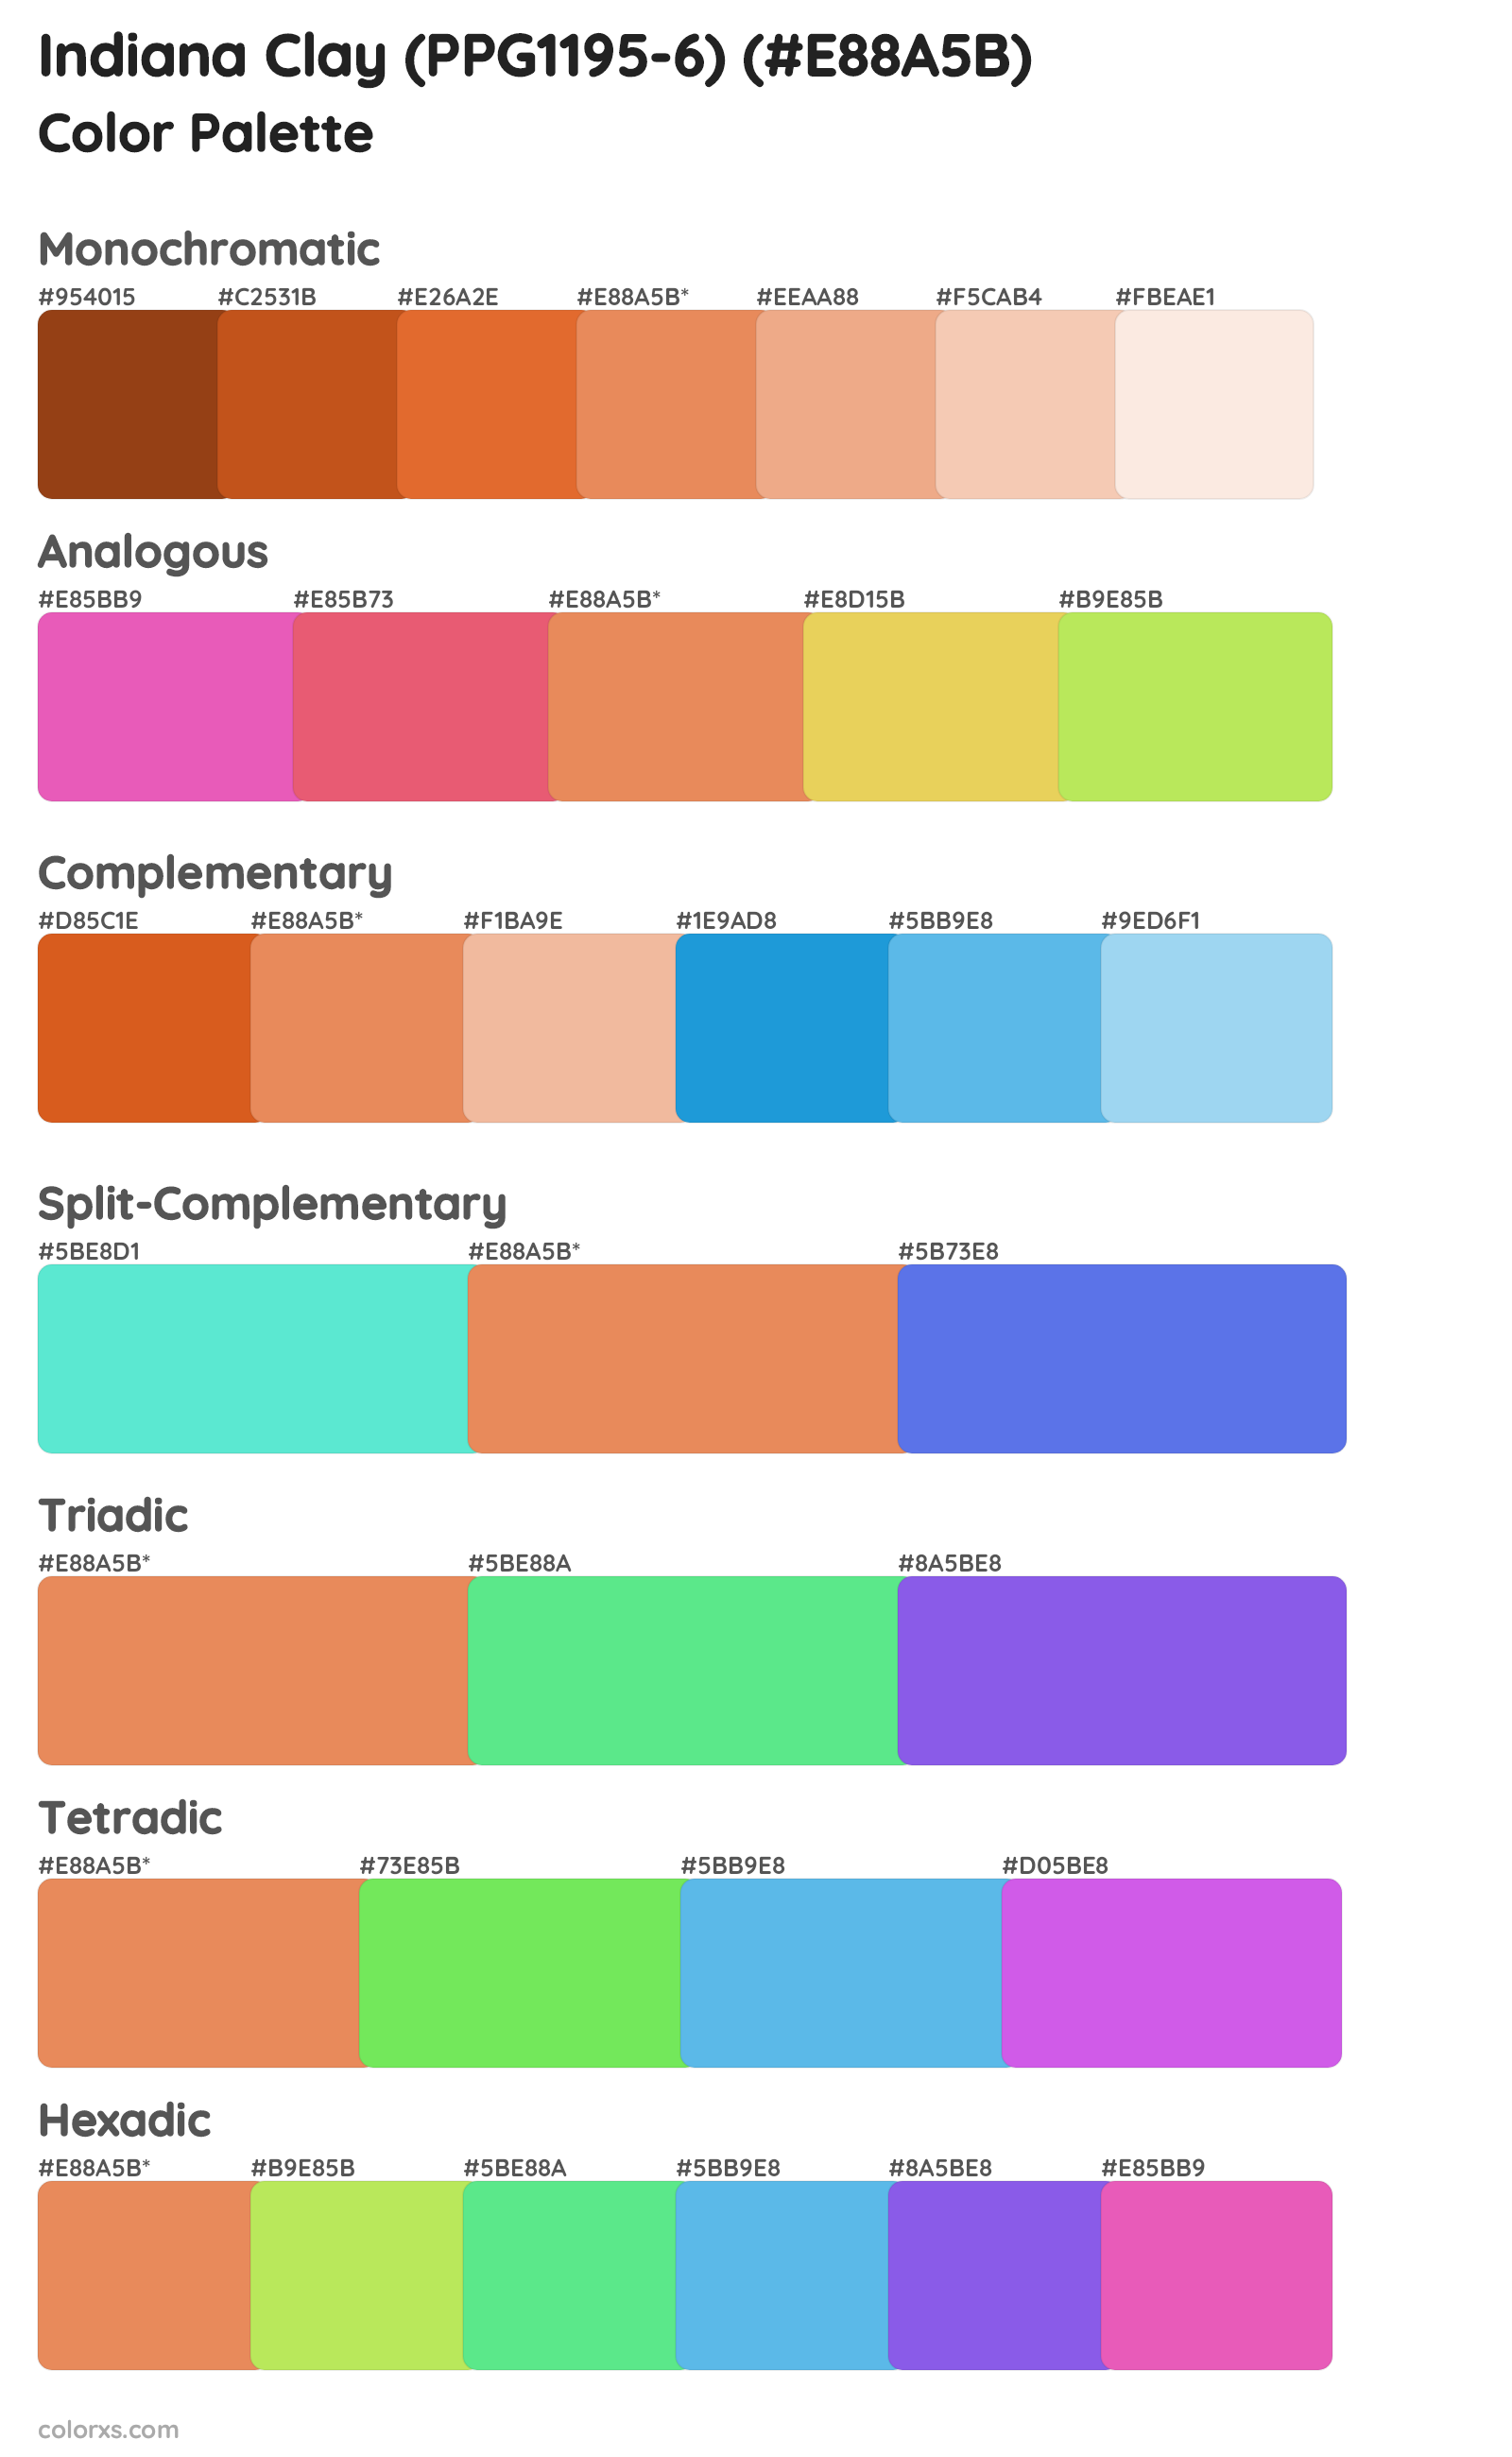 Indiana Clay (PPG1195-6) Color Scheme Palettes